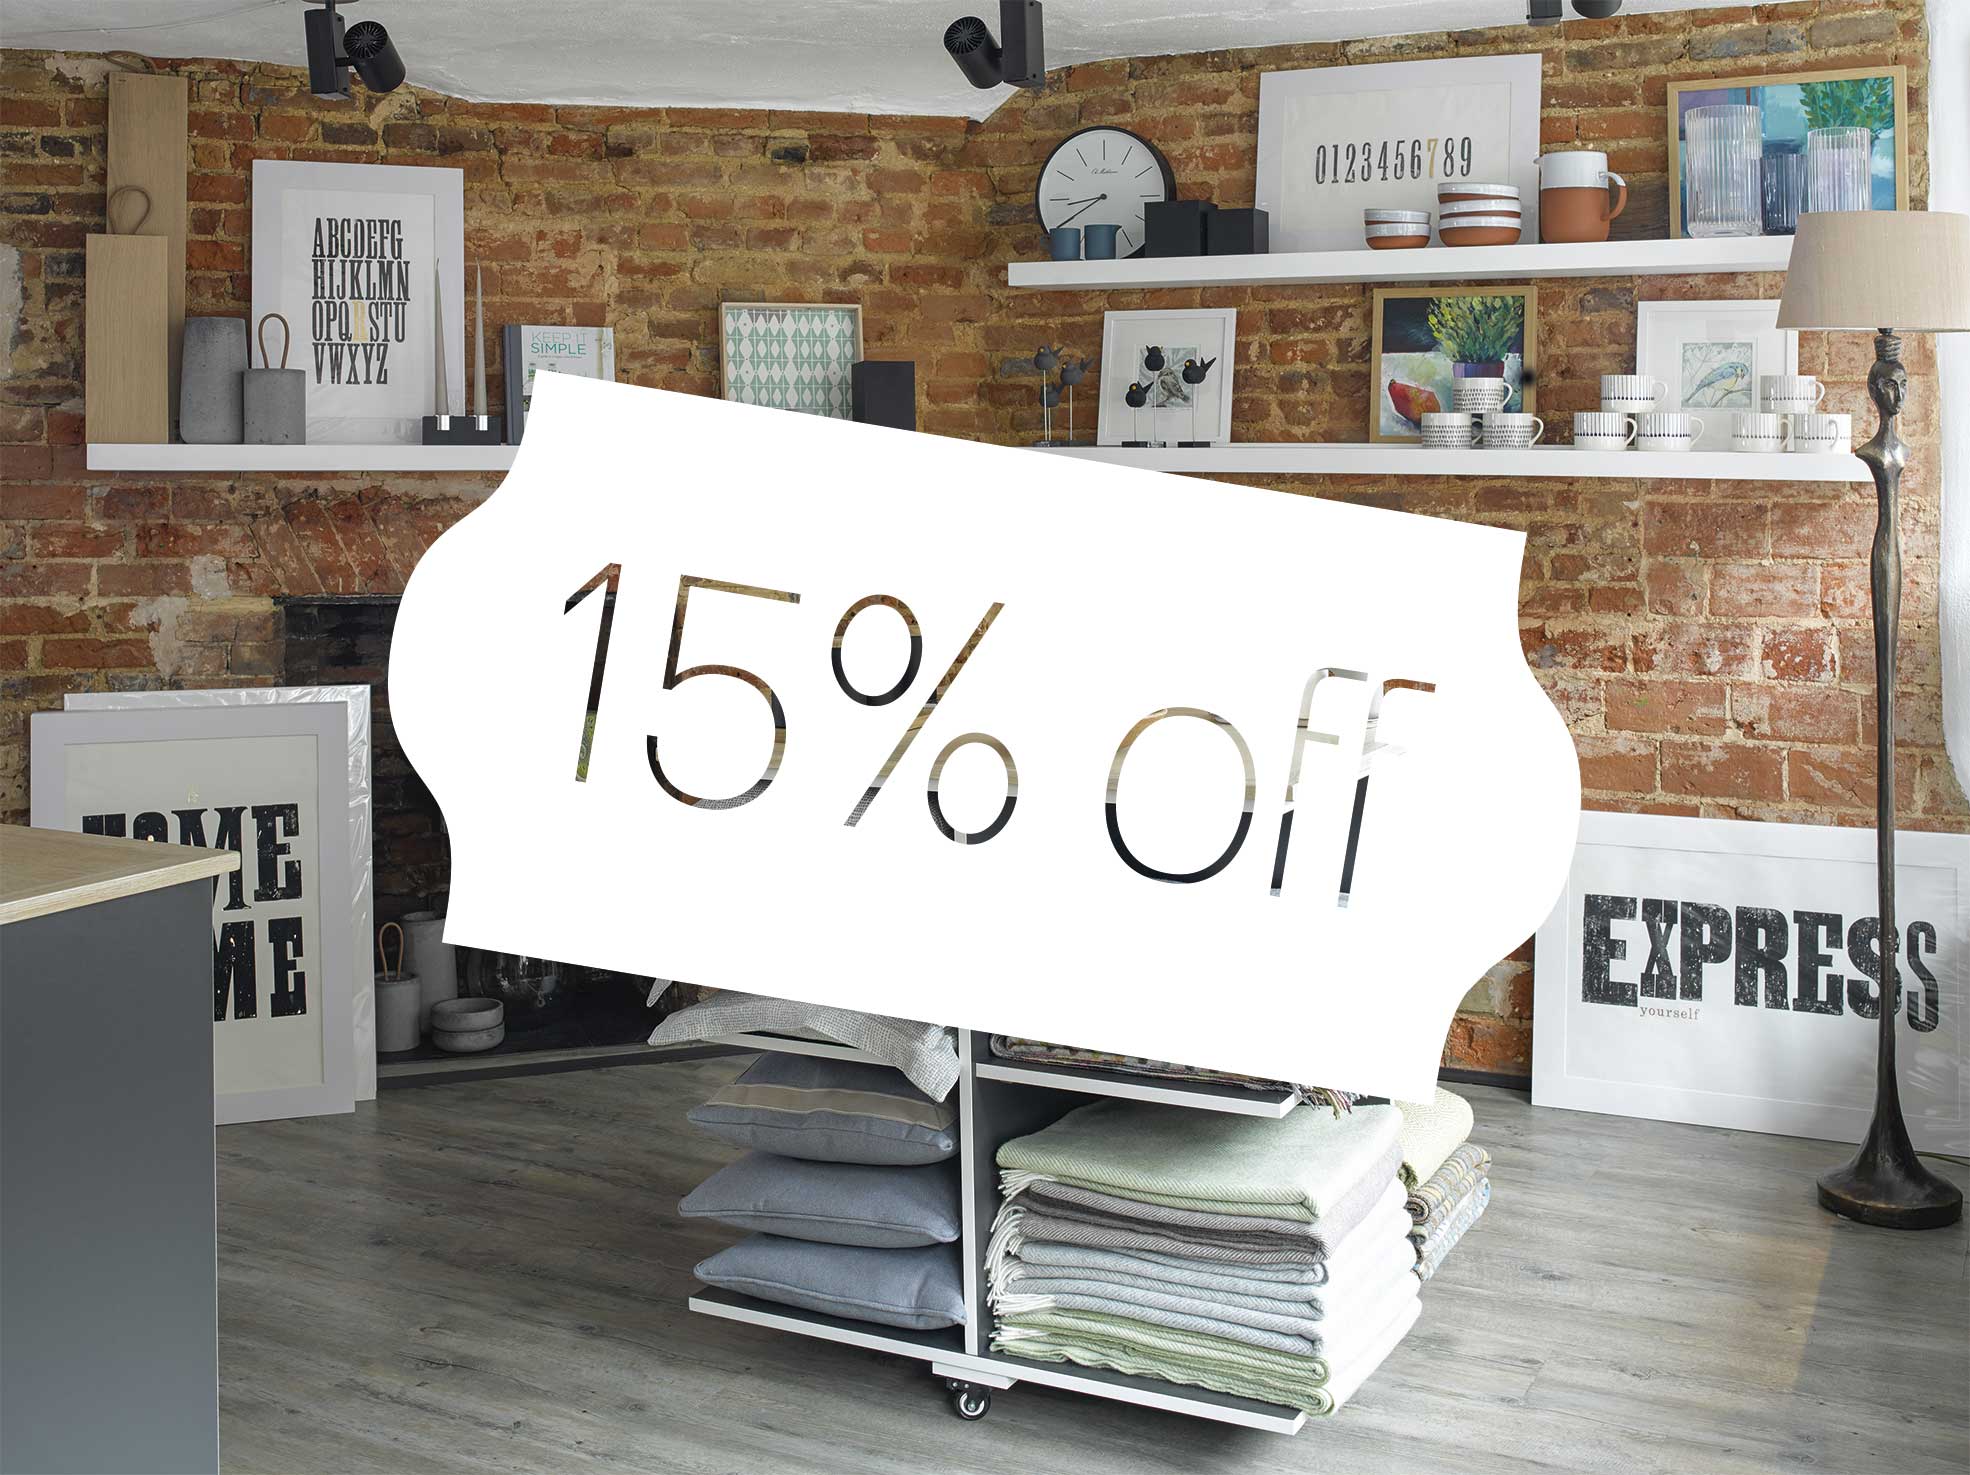 This summer, there's 15% off in our showroom